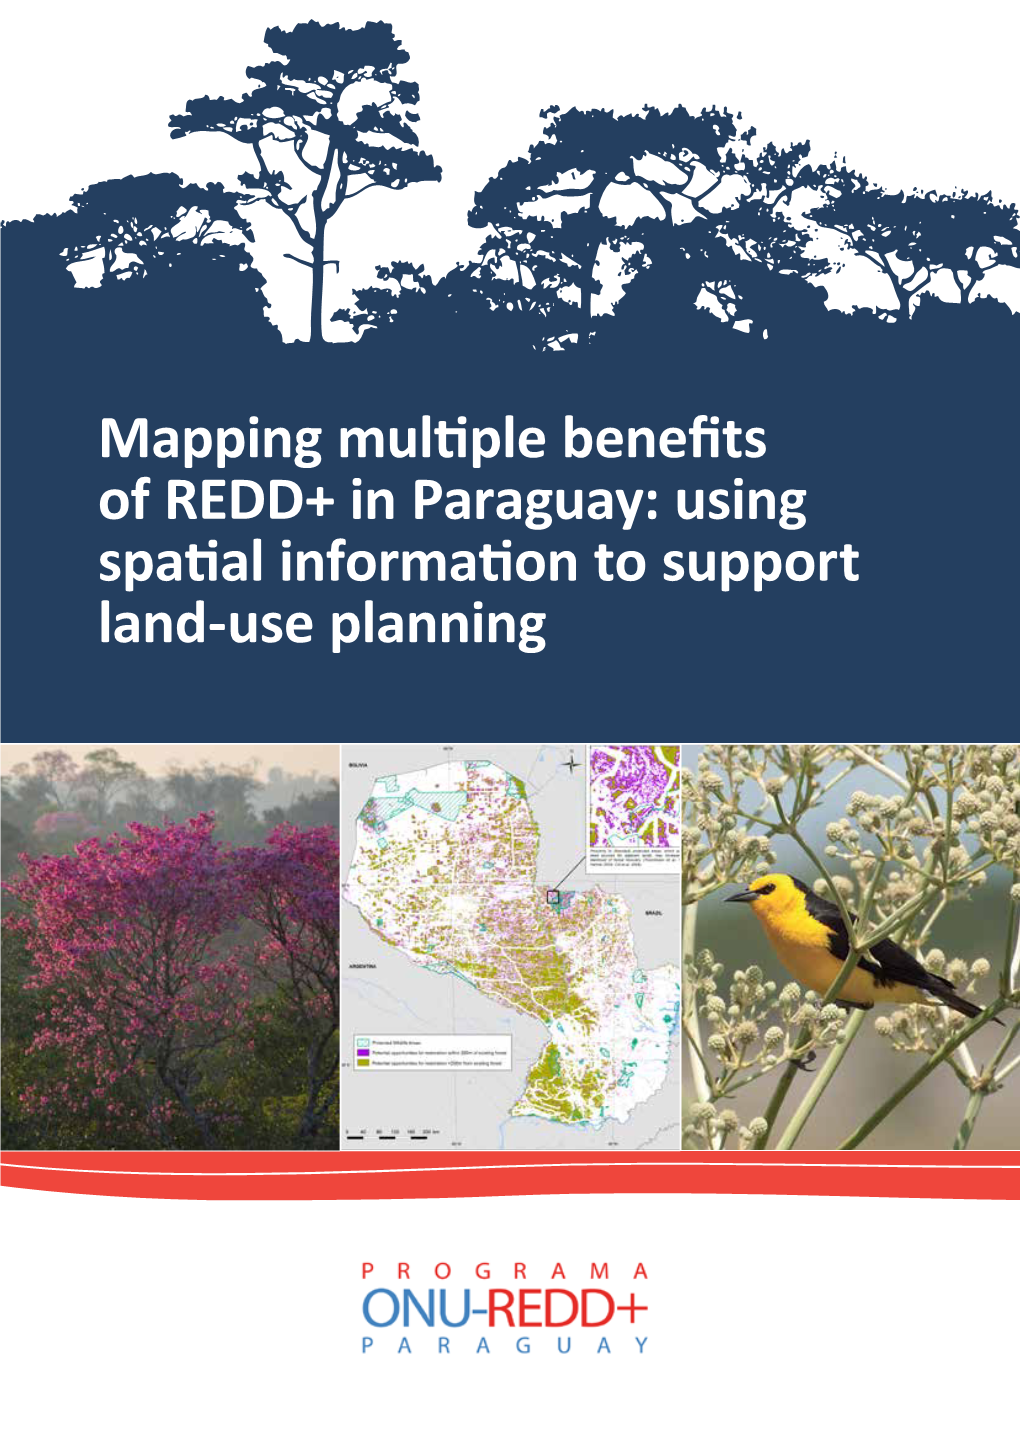 Mapping Multiple Benefits of REDD+ in Paraguay: Using Spatial Information to Support Land-Use Planning UN-UN-UN-REDDREDDREDD